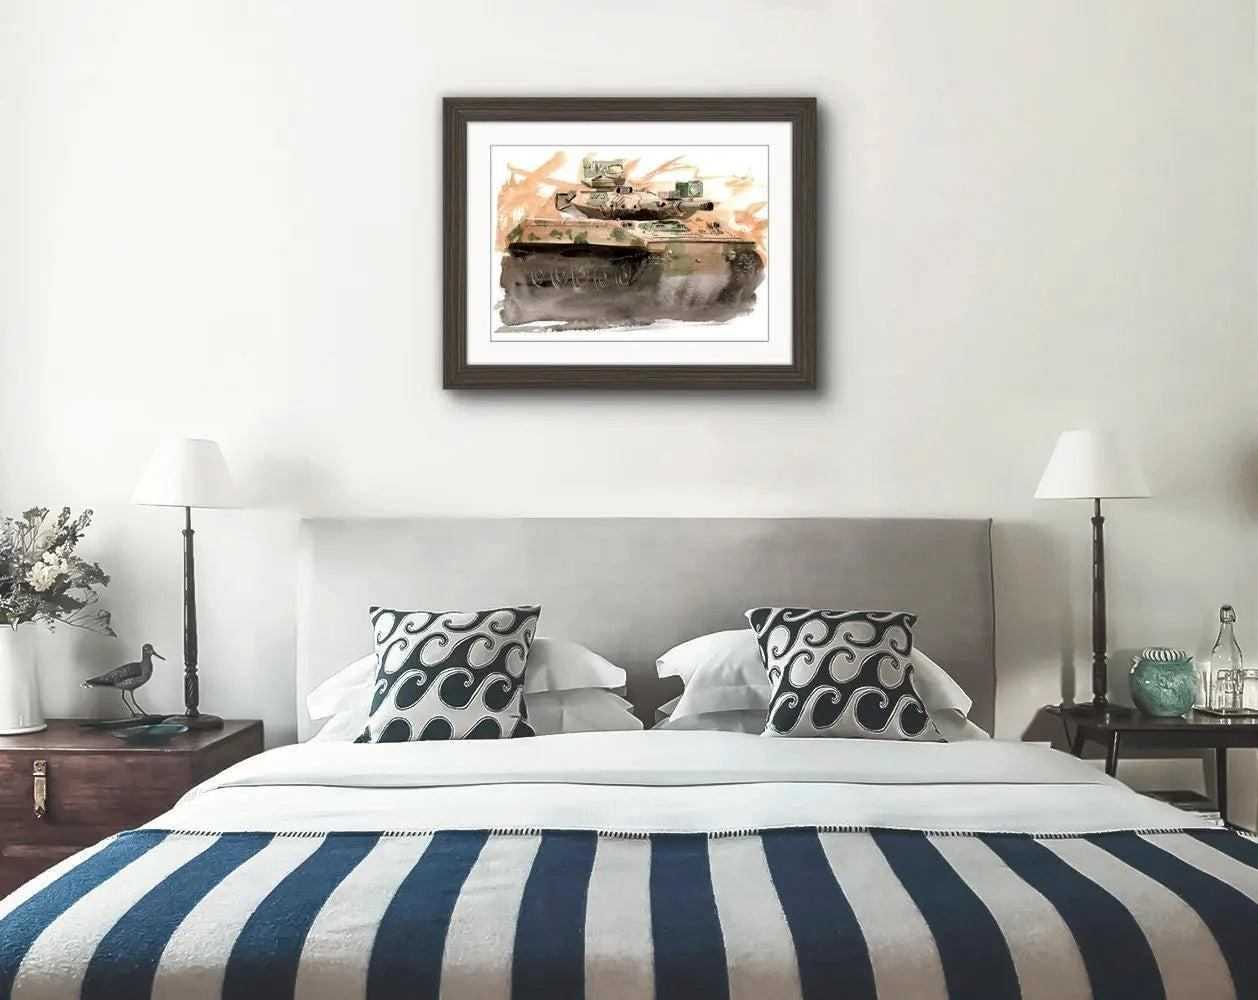 M551 Sheridan Tank Painting Us Forces Gulf War Numbered limited edition Giclee Print of a Watercolour Painting ArtbyMyleslaurence